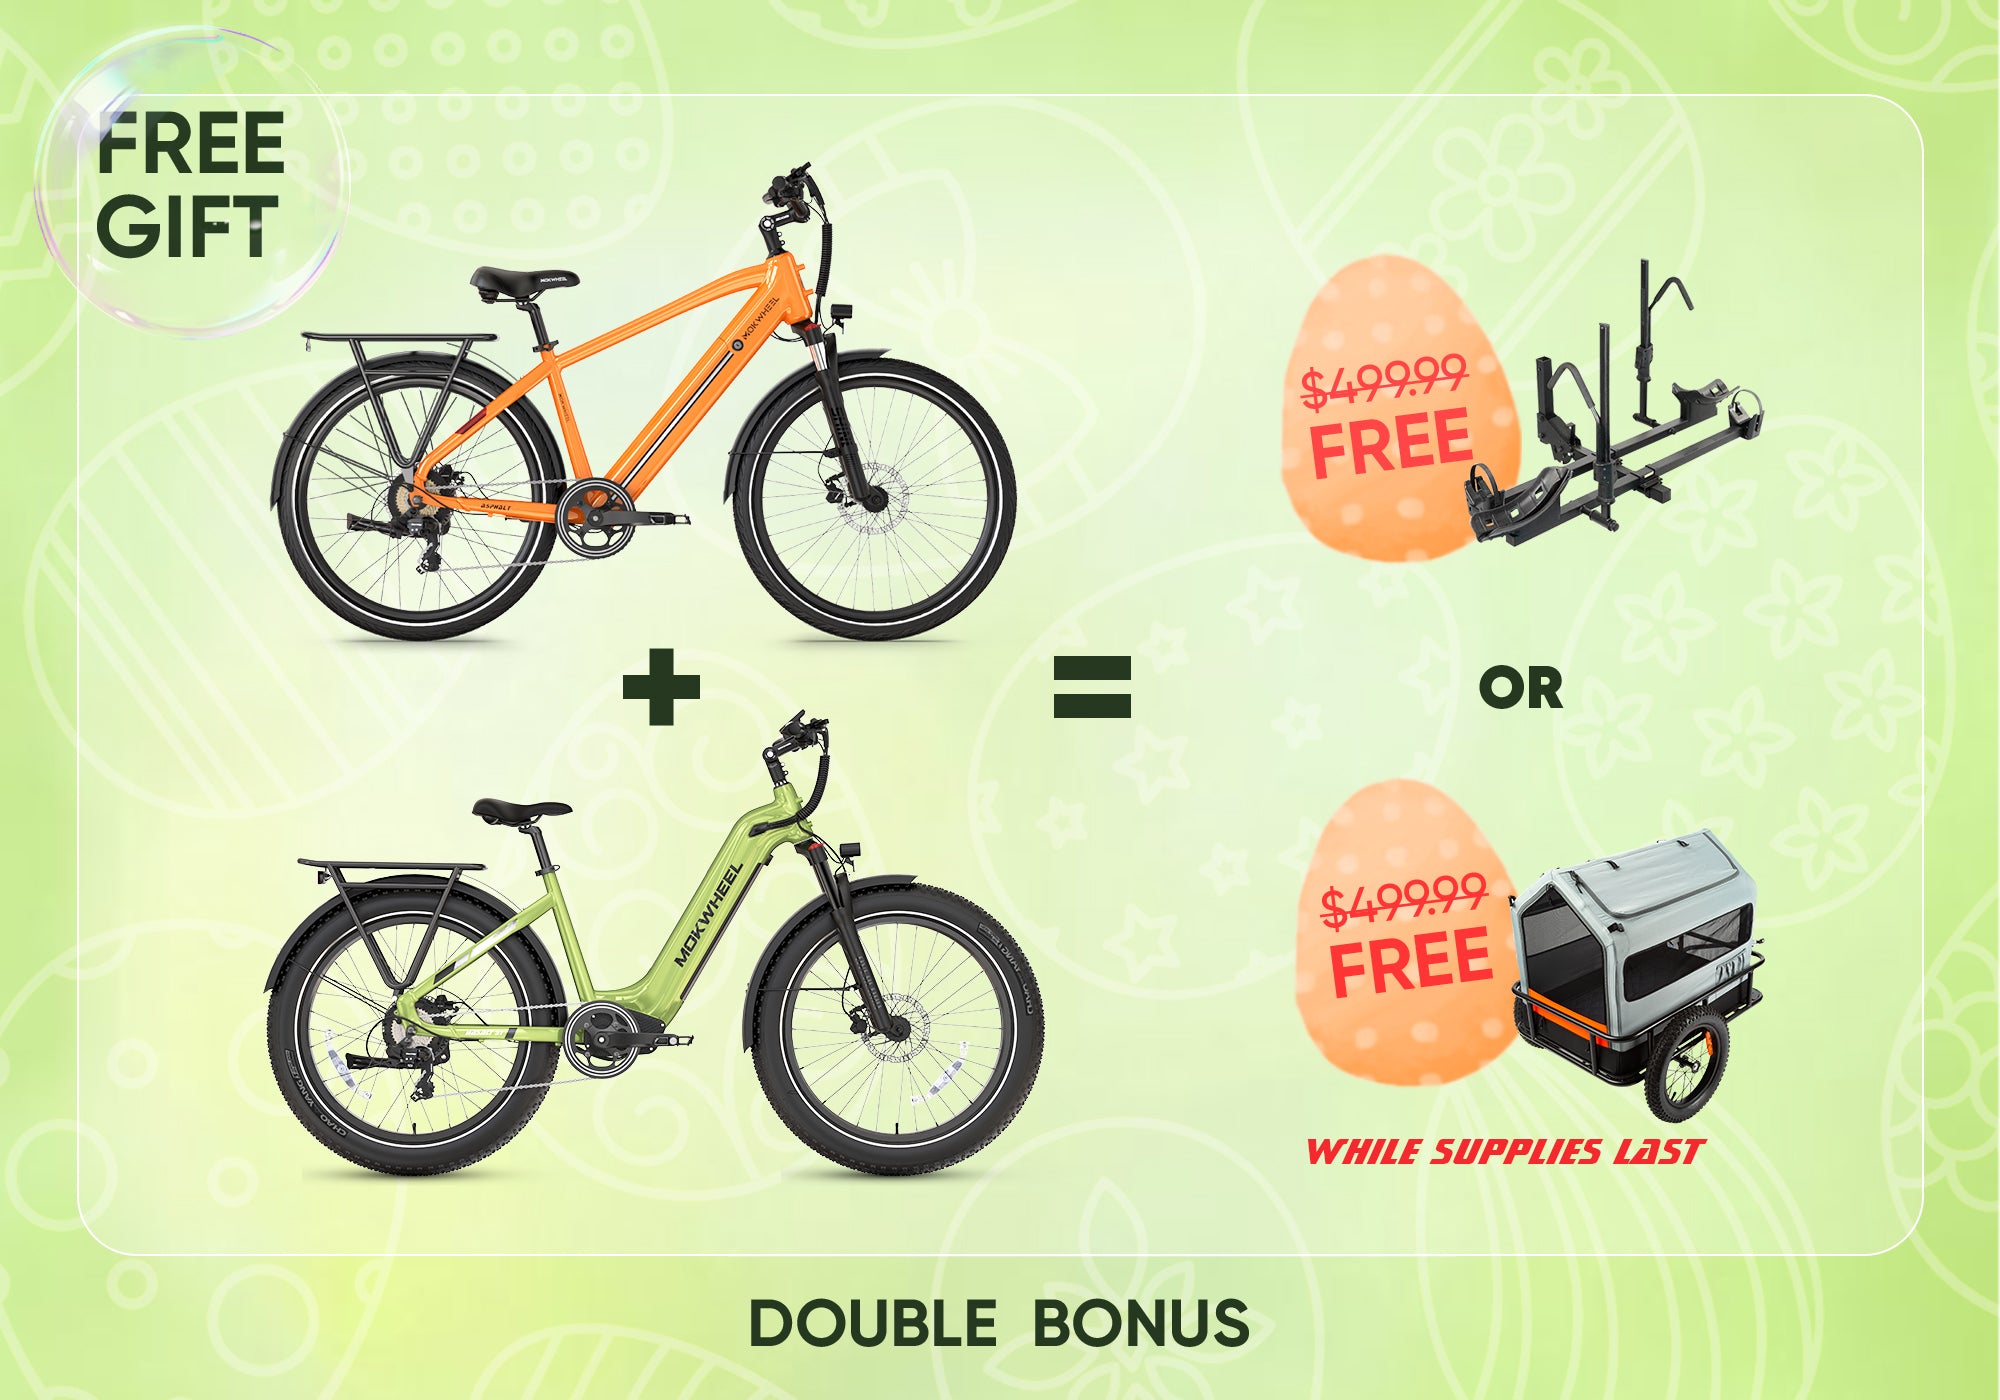 Buy two E-Bikes and get a FREE accessory!